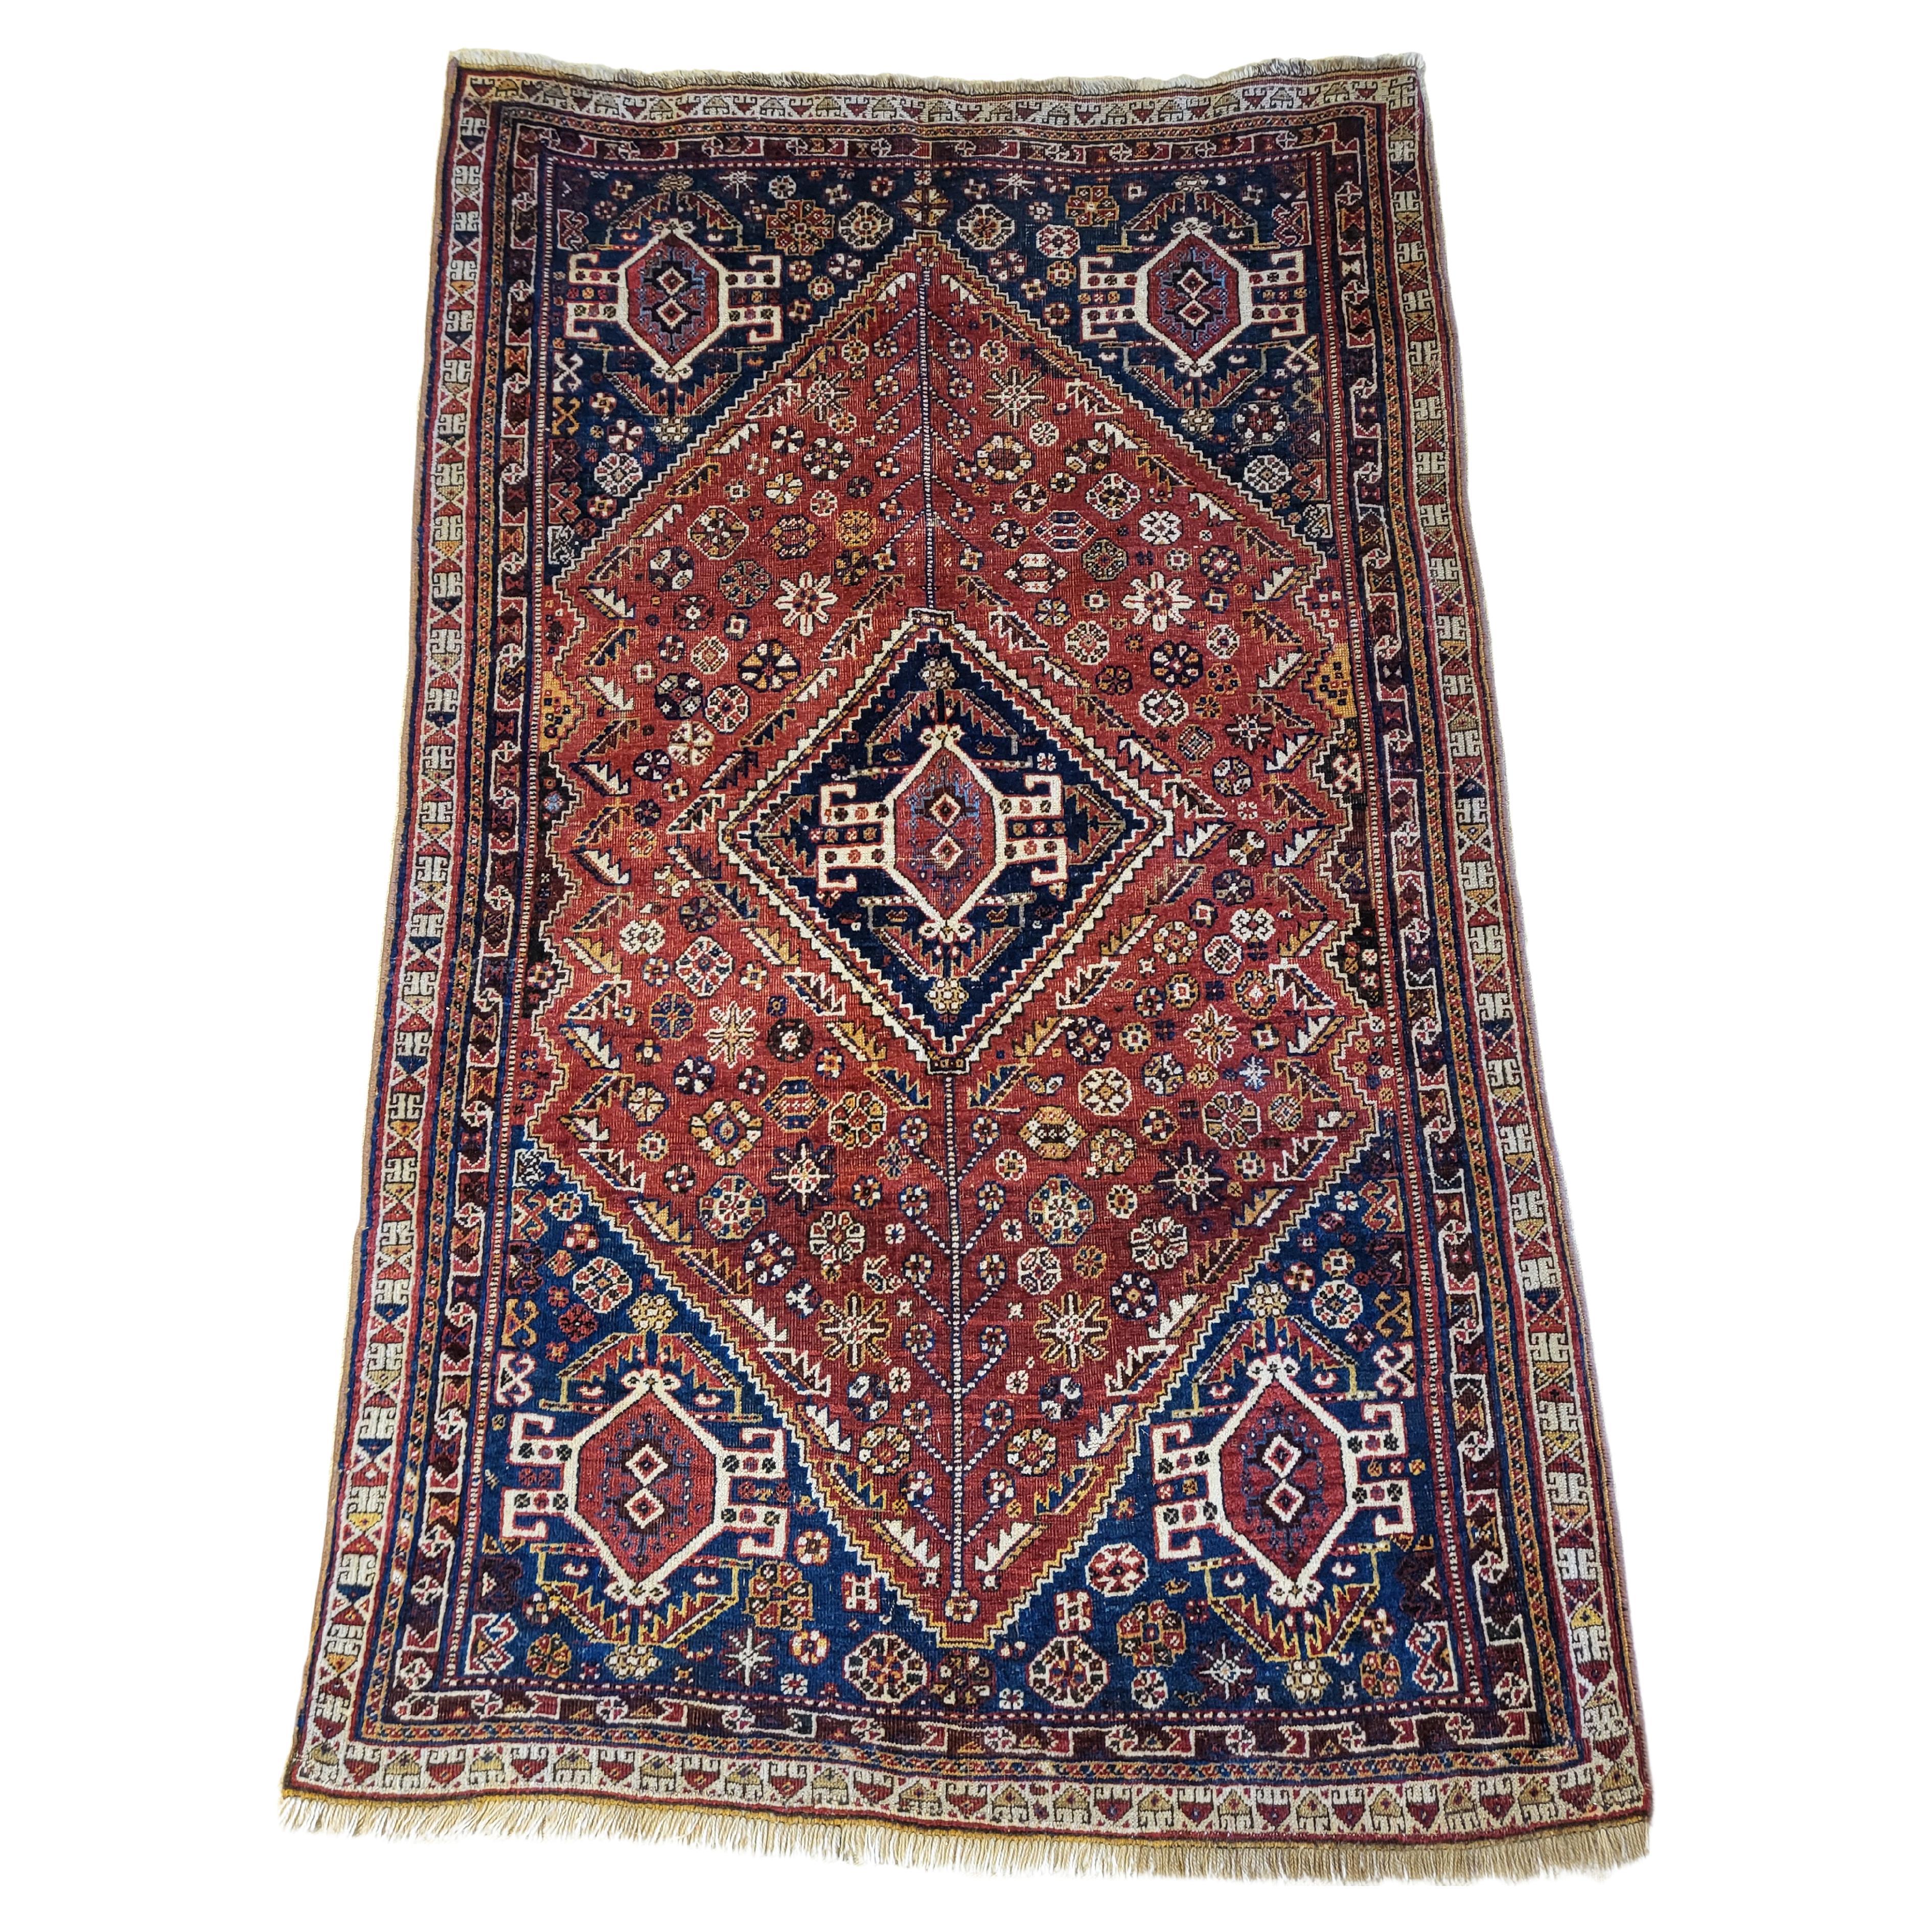 Late 1800's Qashqai - Nomadic Persian Rug - PRG Exclusive For Sale